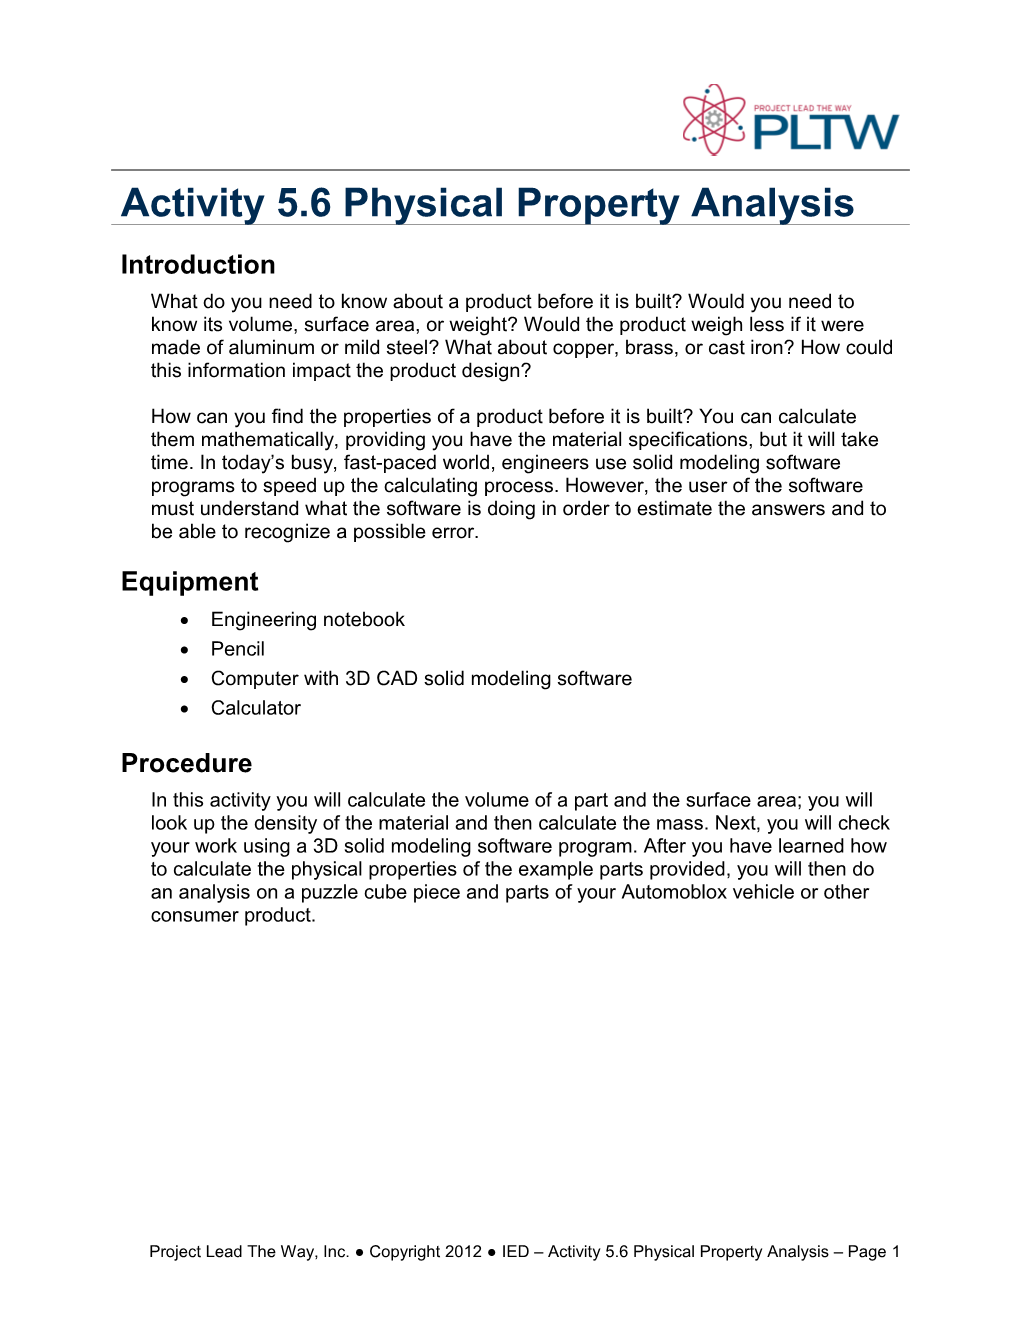 Activity 5.6 Physical Property Analysis